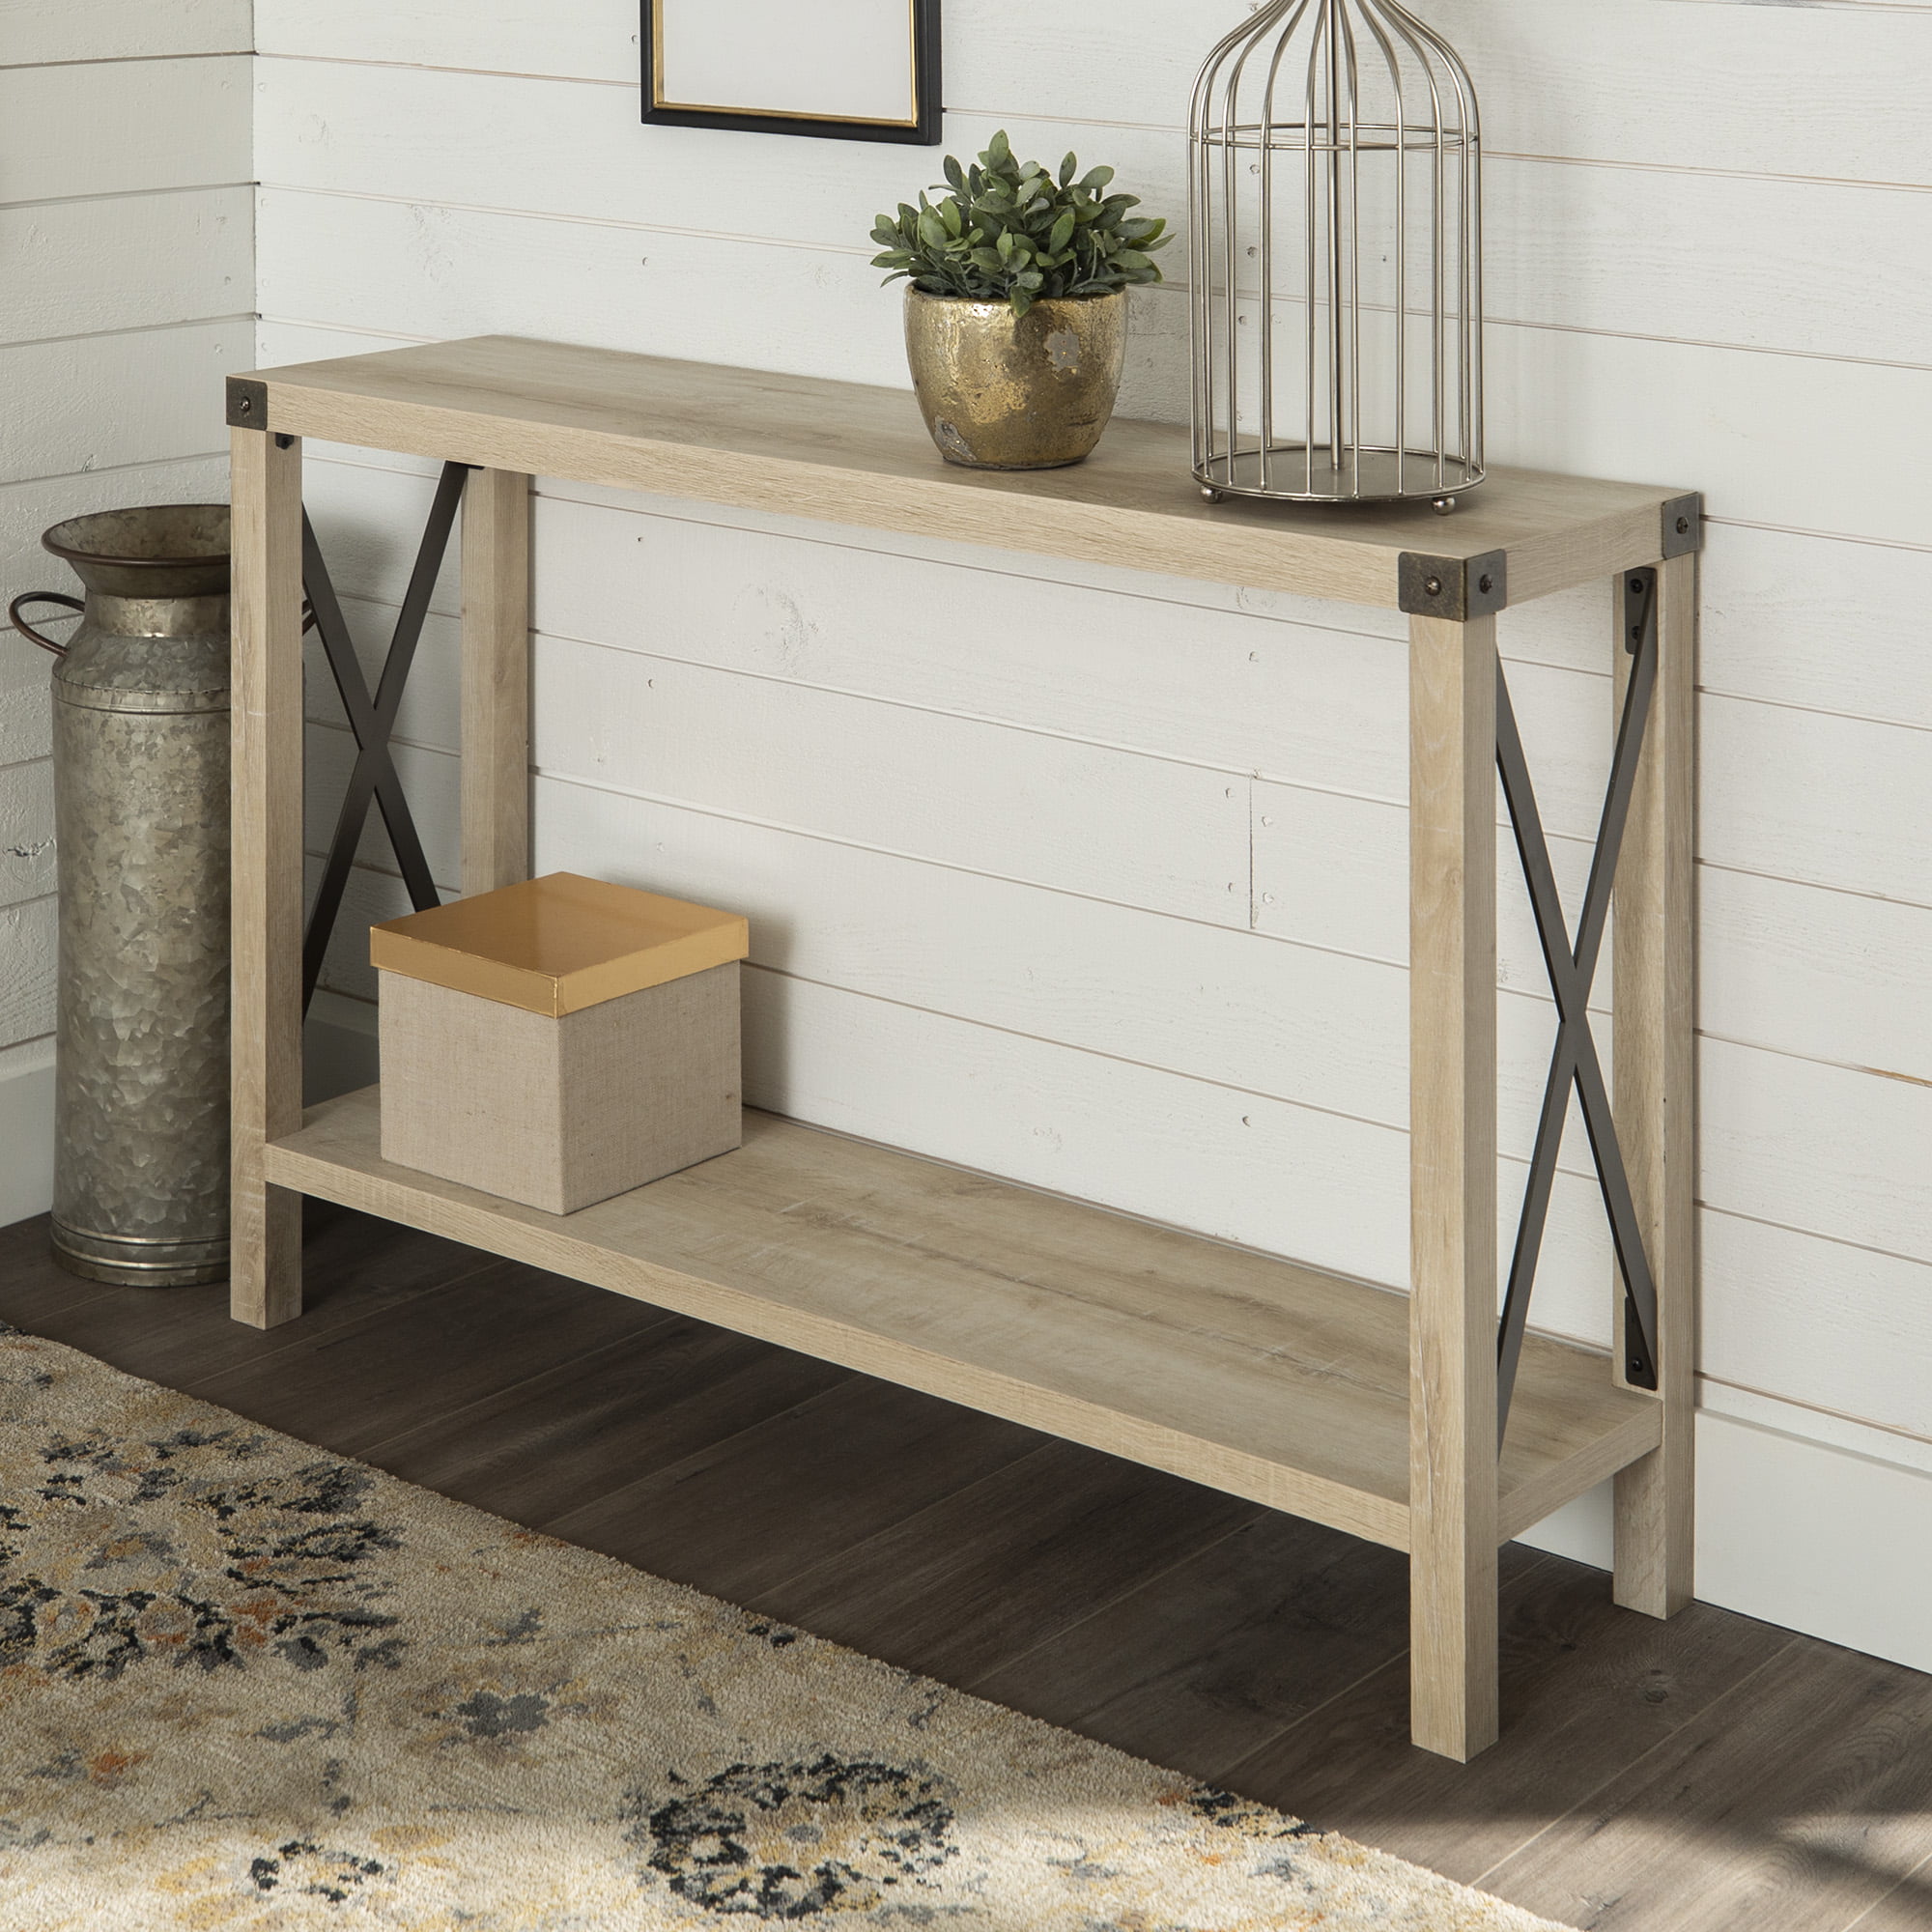 Woven Paths Magnolia Metal X Console, X Console Table